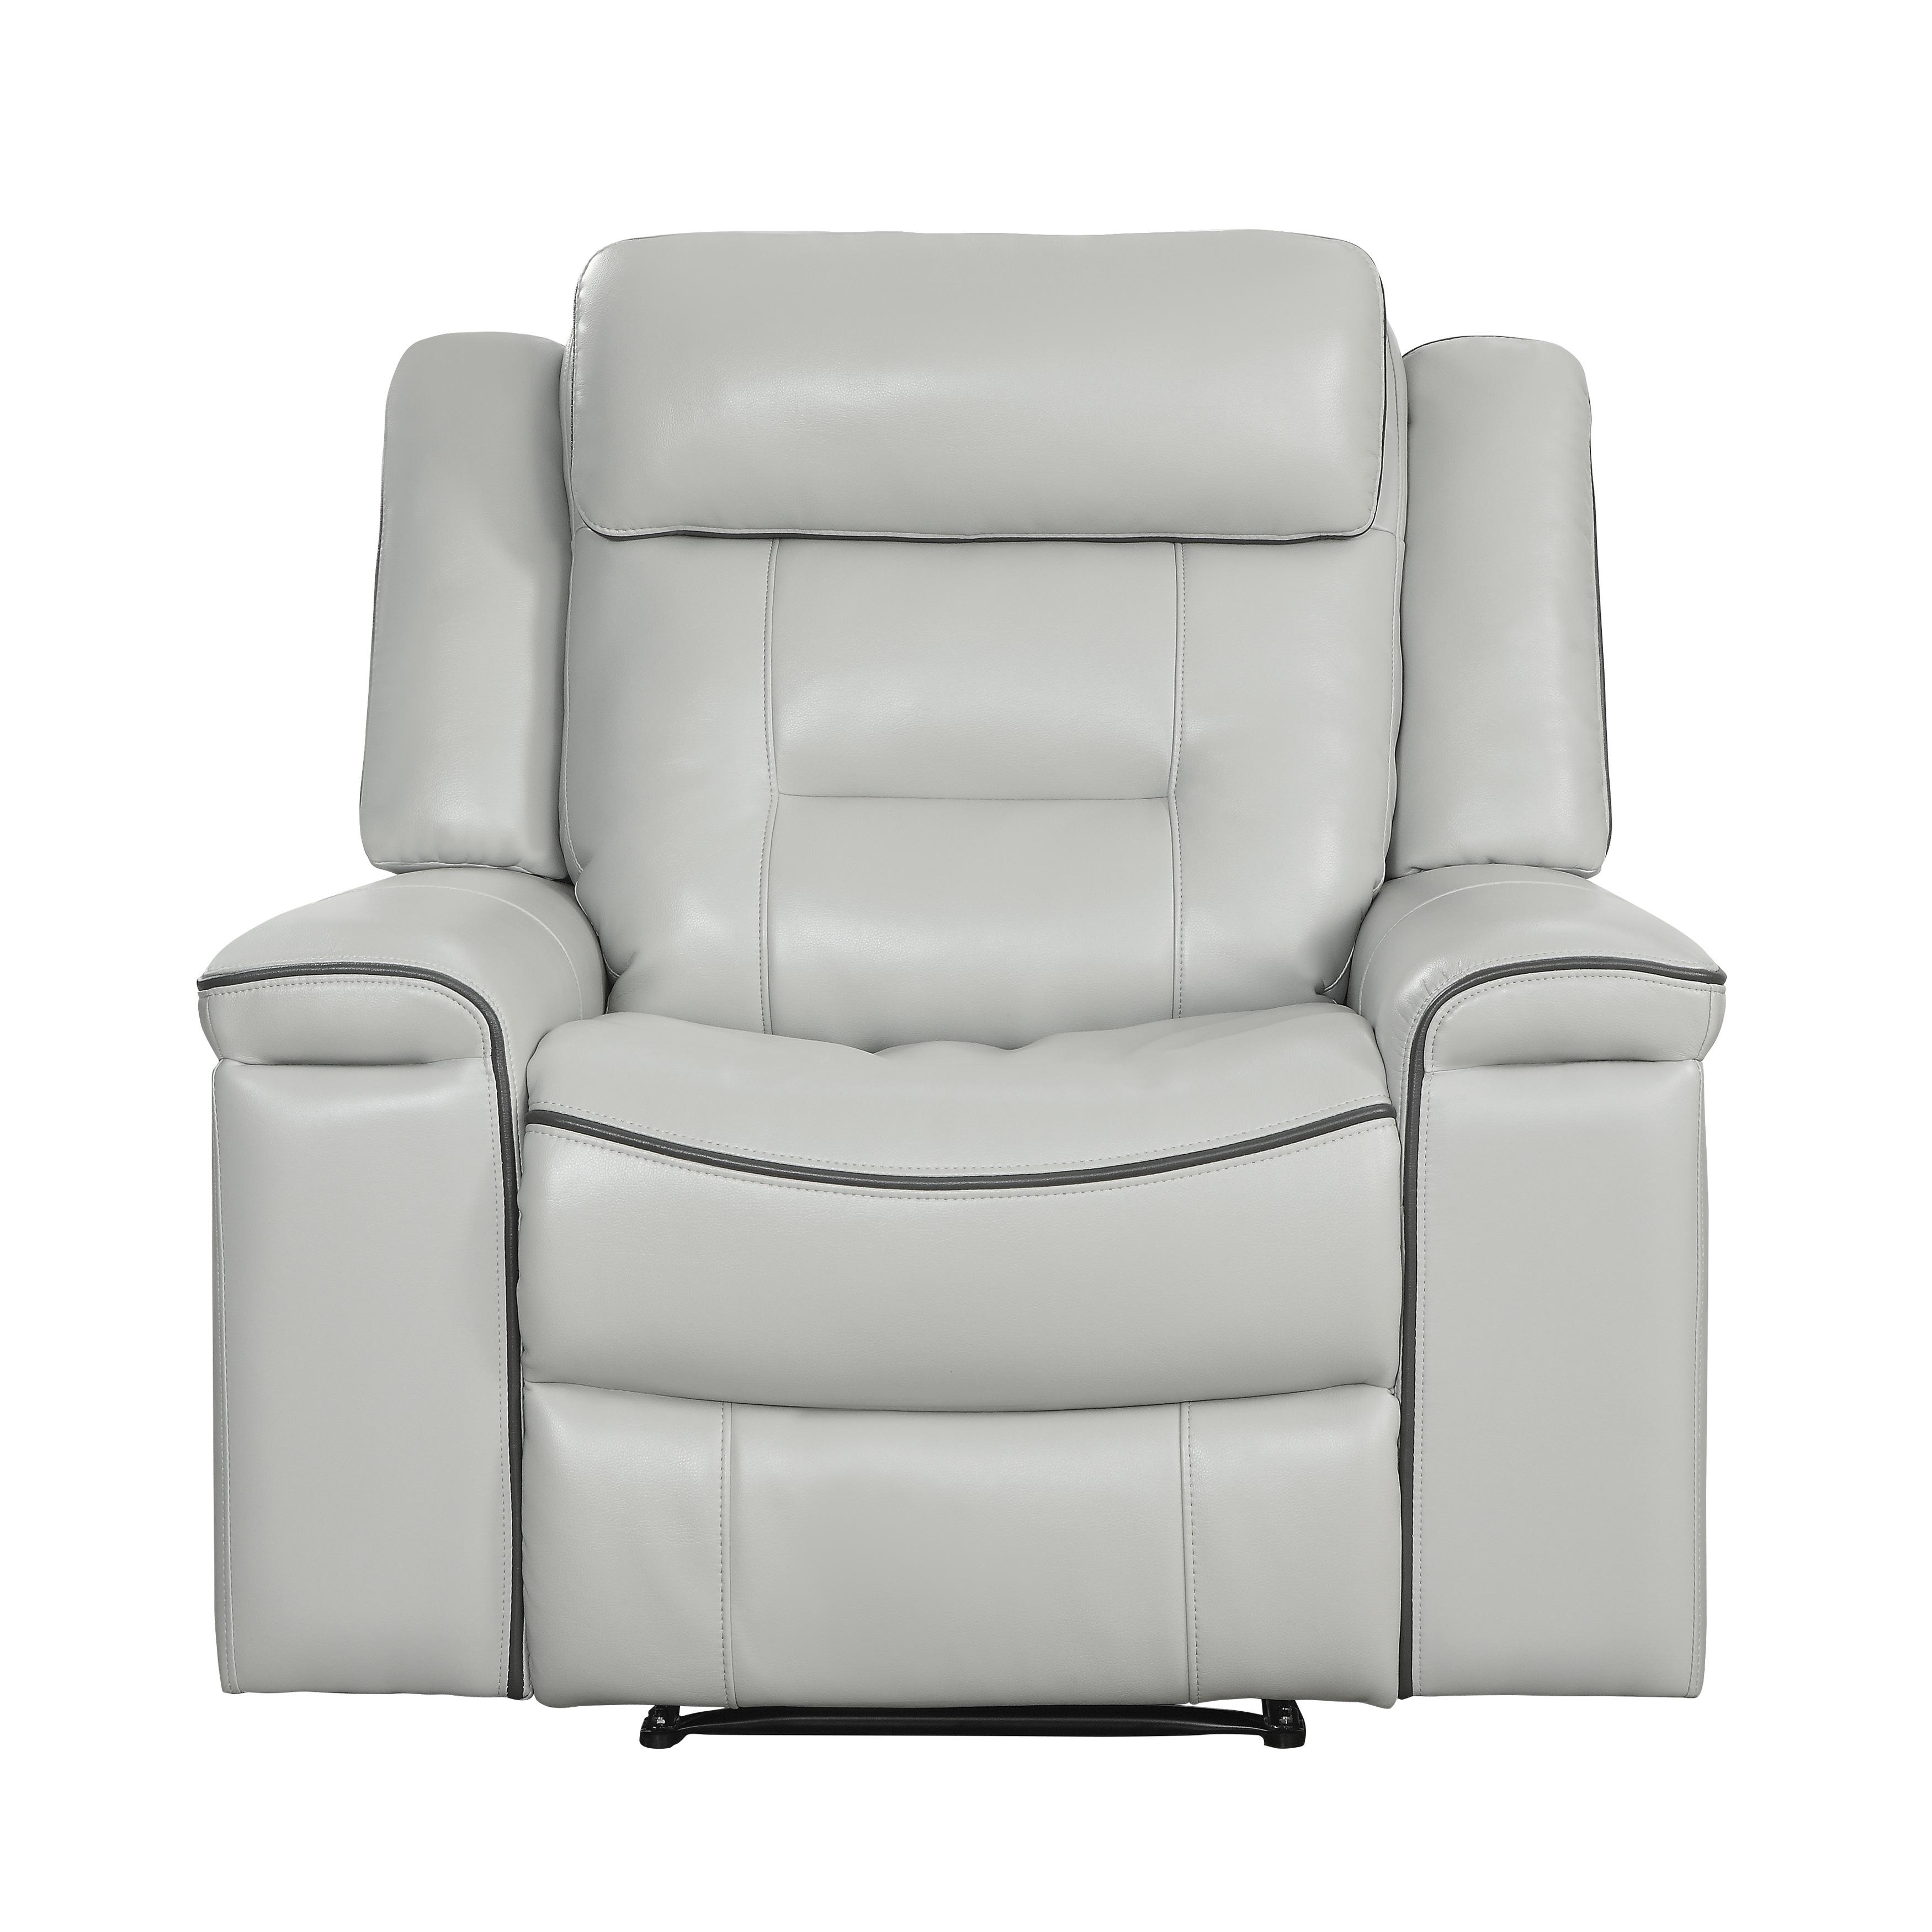 

    
Contemporary Light Gray Faux Leather Reclining Chair Homelegance 9999GY-1 Darwan
